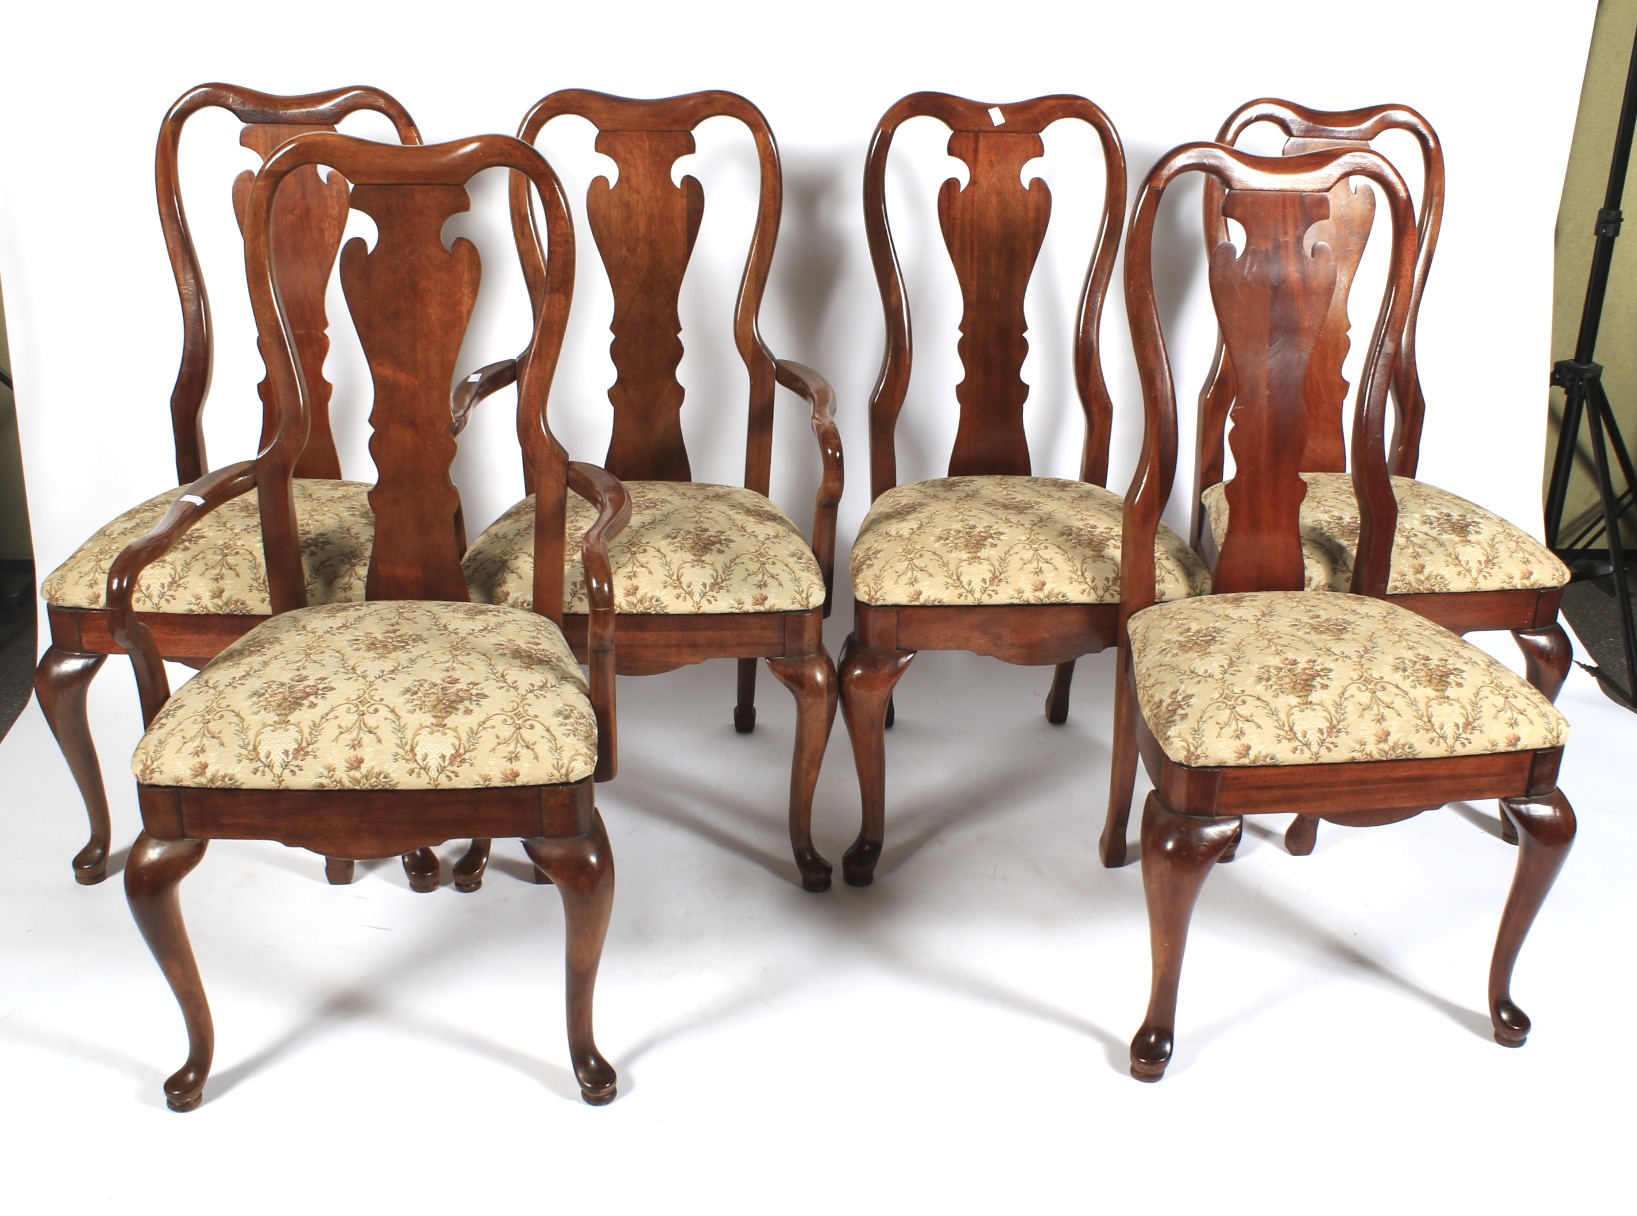 A 20th century elm wake drop leaf table and six chairs. - Image 4 of 5